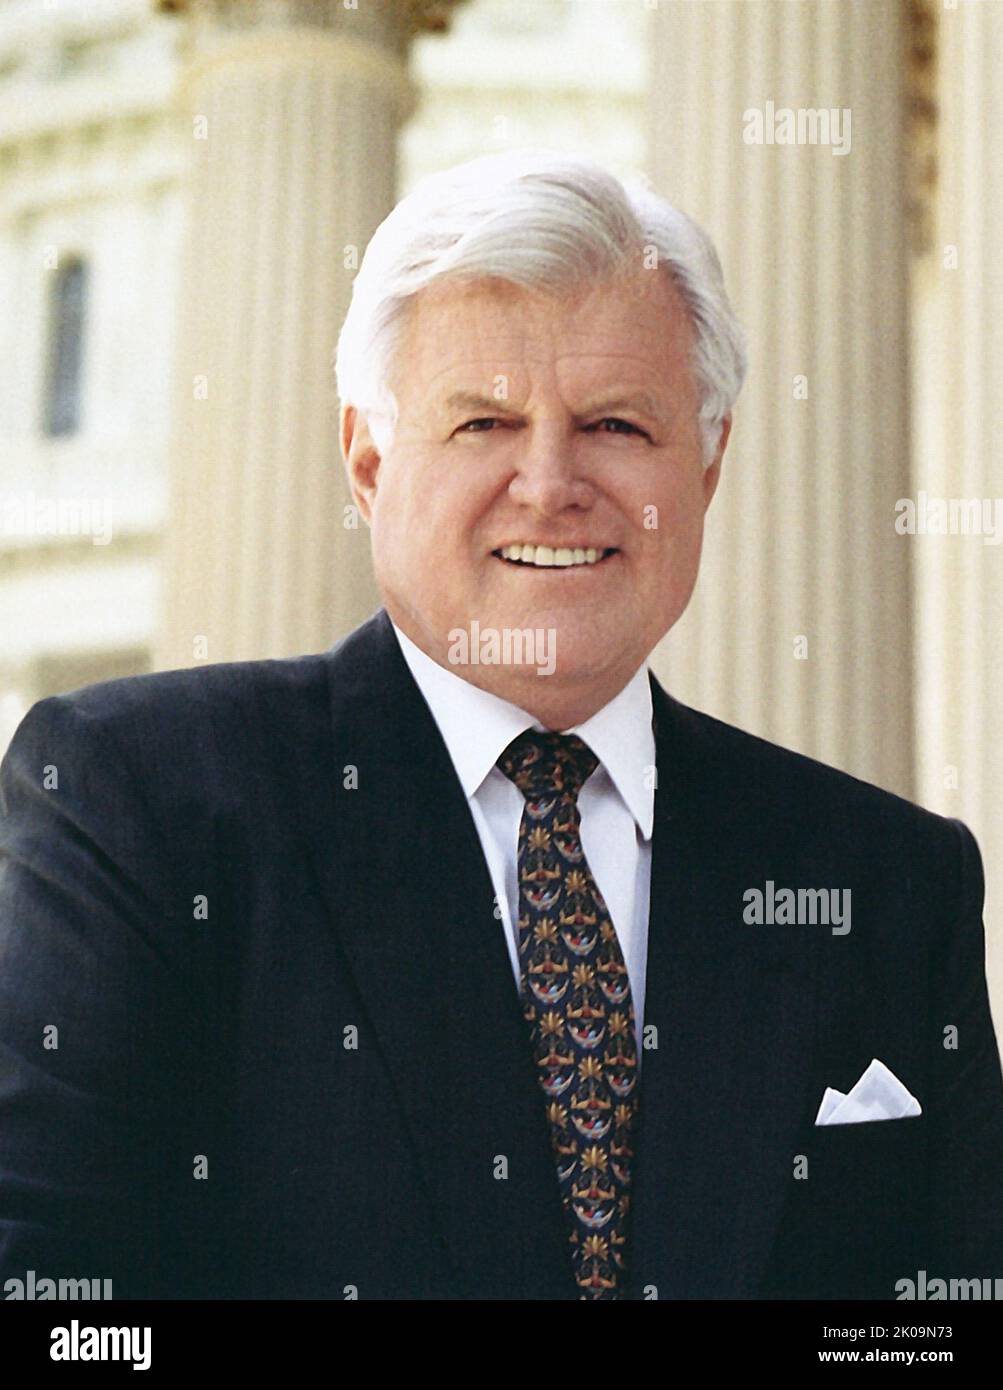 Edward Moore Kennedy (February 22, 1932 - August 25, 2009) was an American lawyer and politician who served as a U.S. senator from Massachusetts for almost 47 years, from 1962 until his death in 2009. A member of the Democratic Party and the Kennedy political family, he was the second most senior member of the Senate when he died. Kennedy was the younger brother of President John F. Kennedy and U.S. attorney general and U.S. senator Robert F. Kennedy. He was the father of Congressman Patrick J. Kennedy. Stock Photo